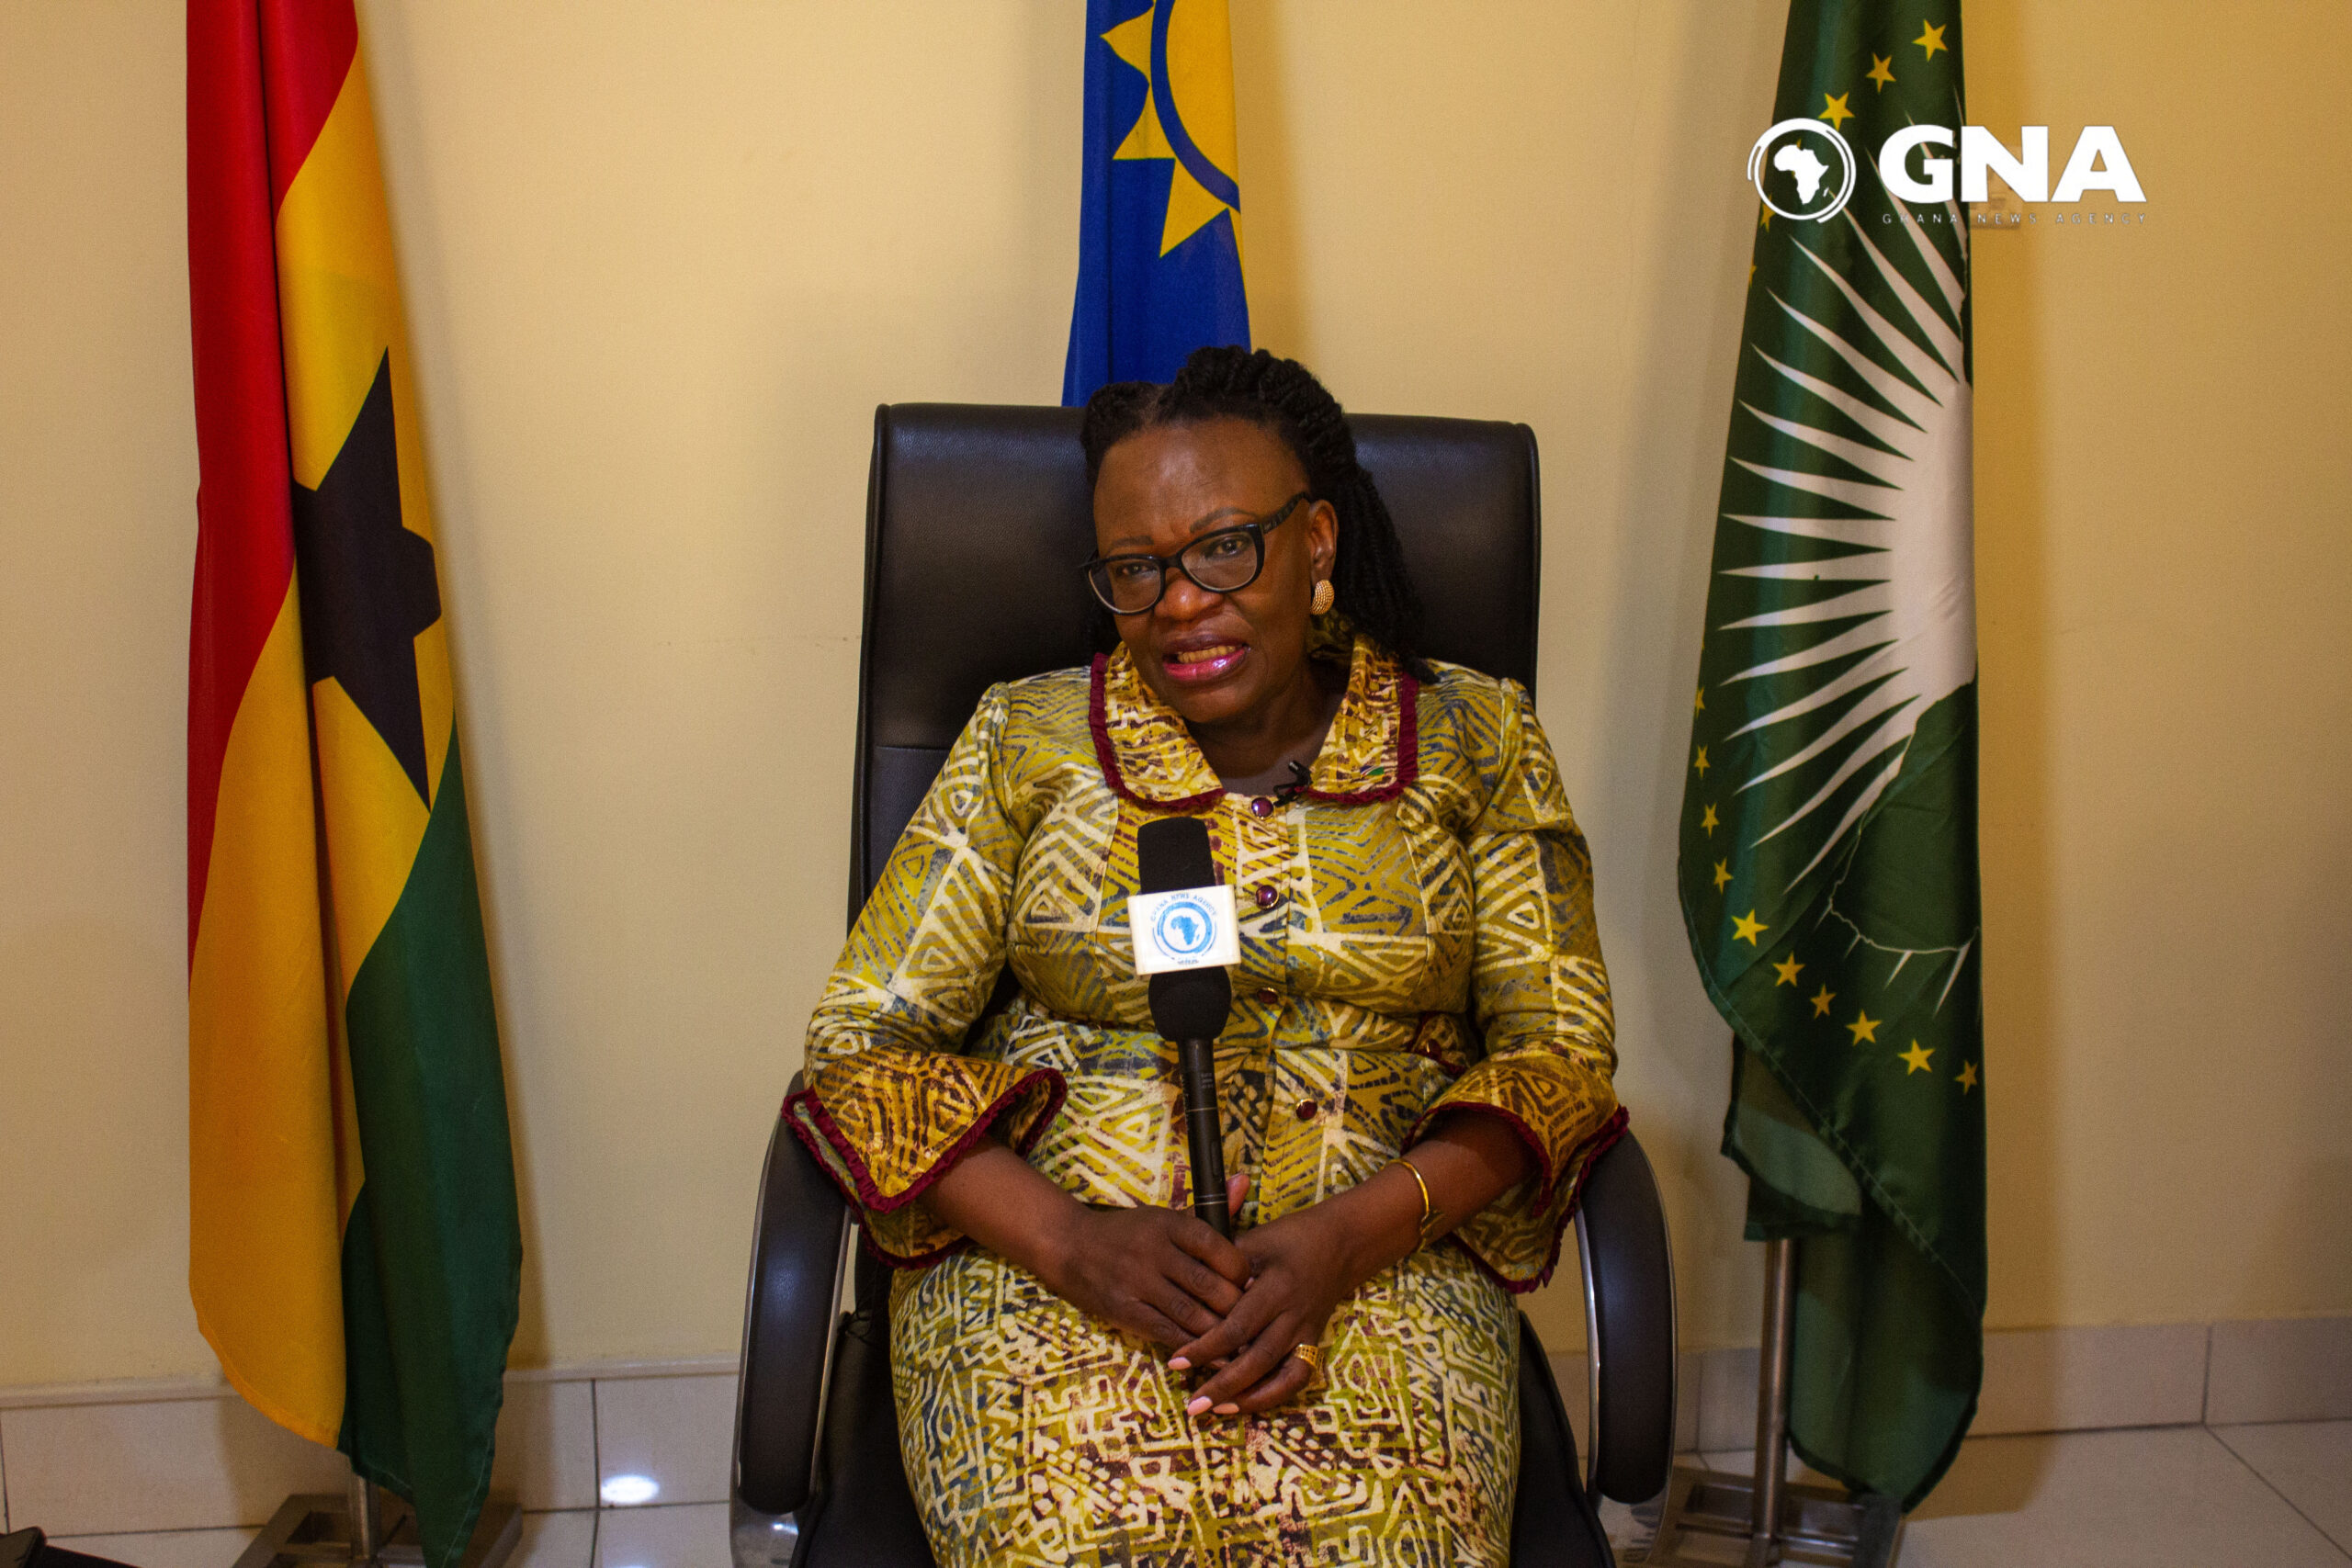 Geingob was a Pan-Africanist who valued the unity of Africa – Namibian High Commissioner to Ghana